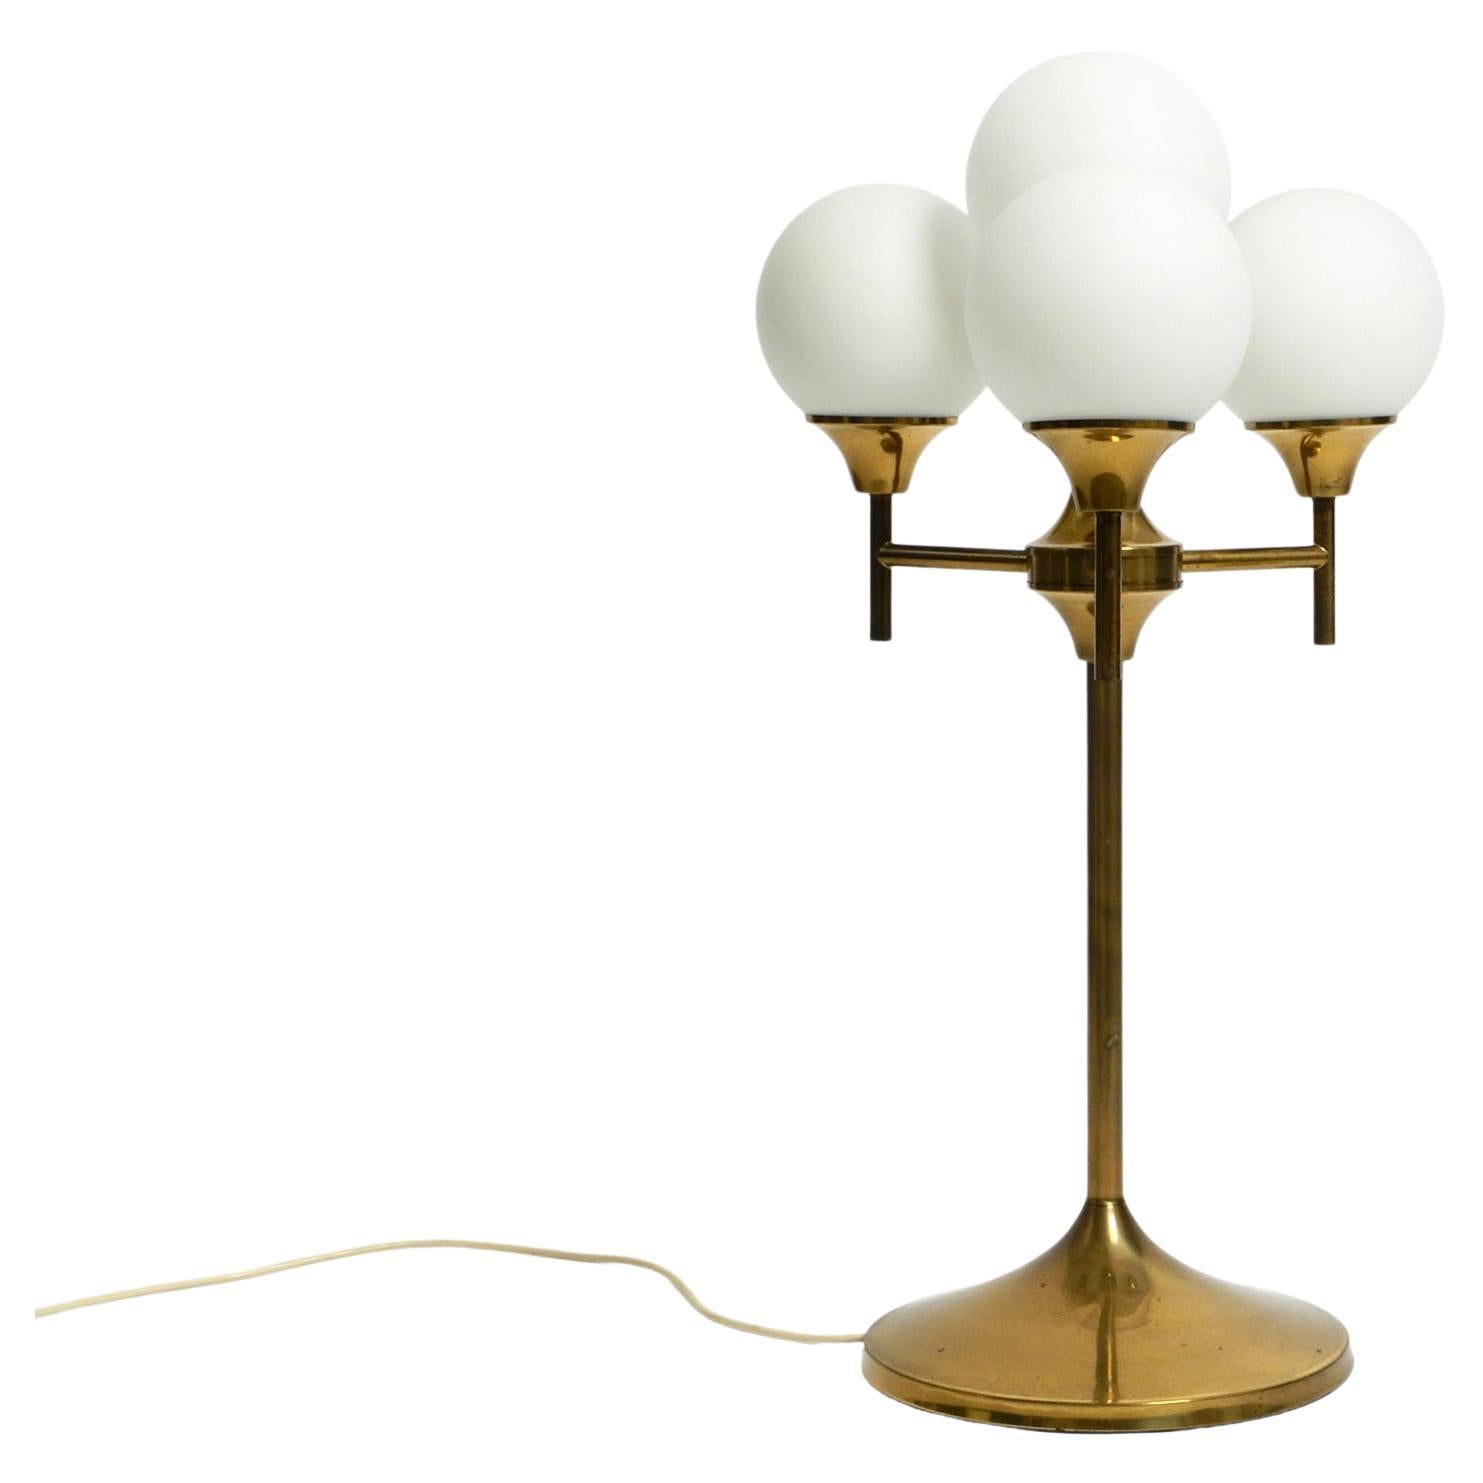 Large 1960s brass table or floor lamp with 4 glass spheres by Kaiser Leuchten